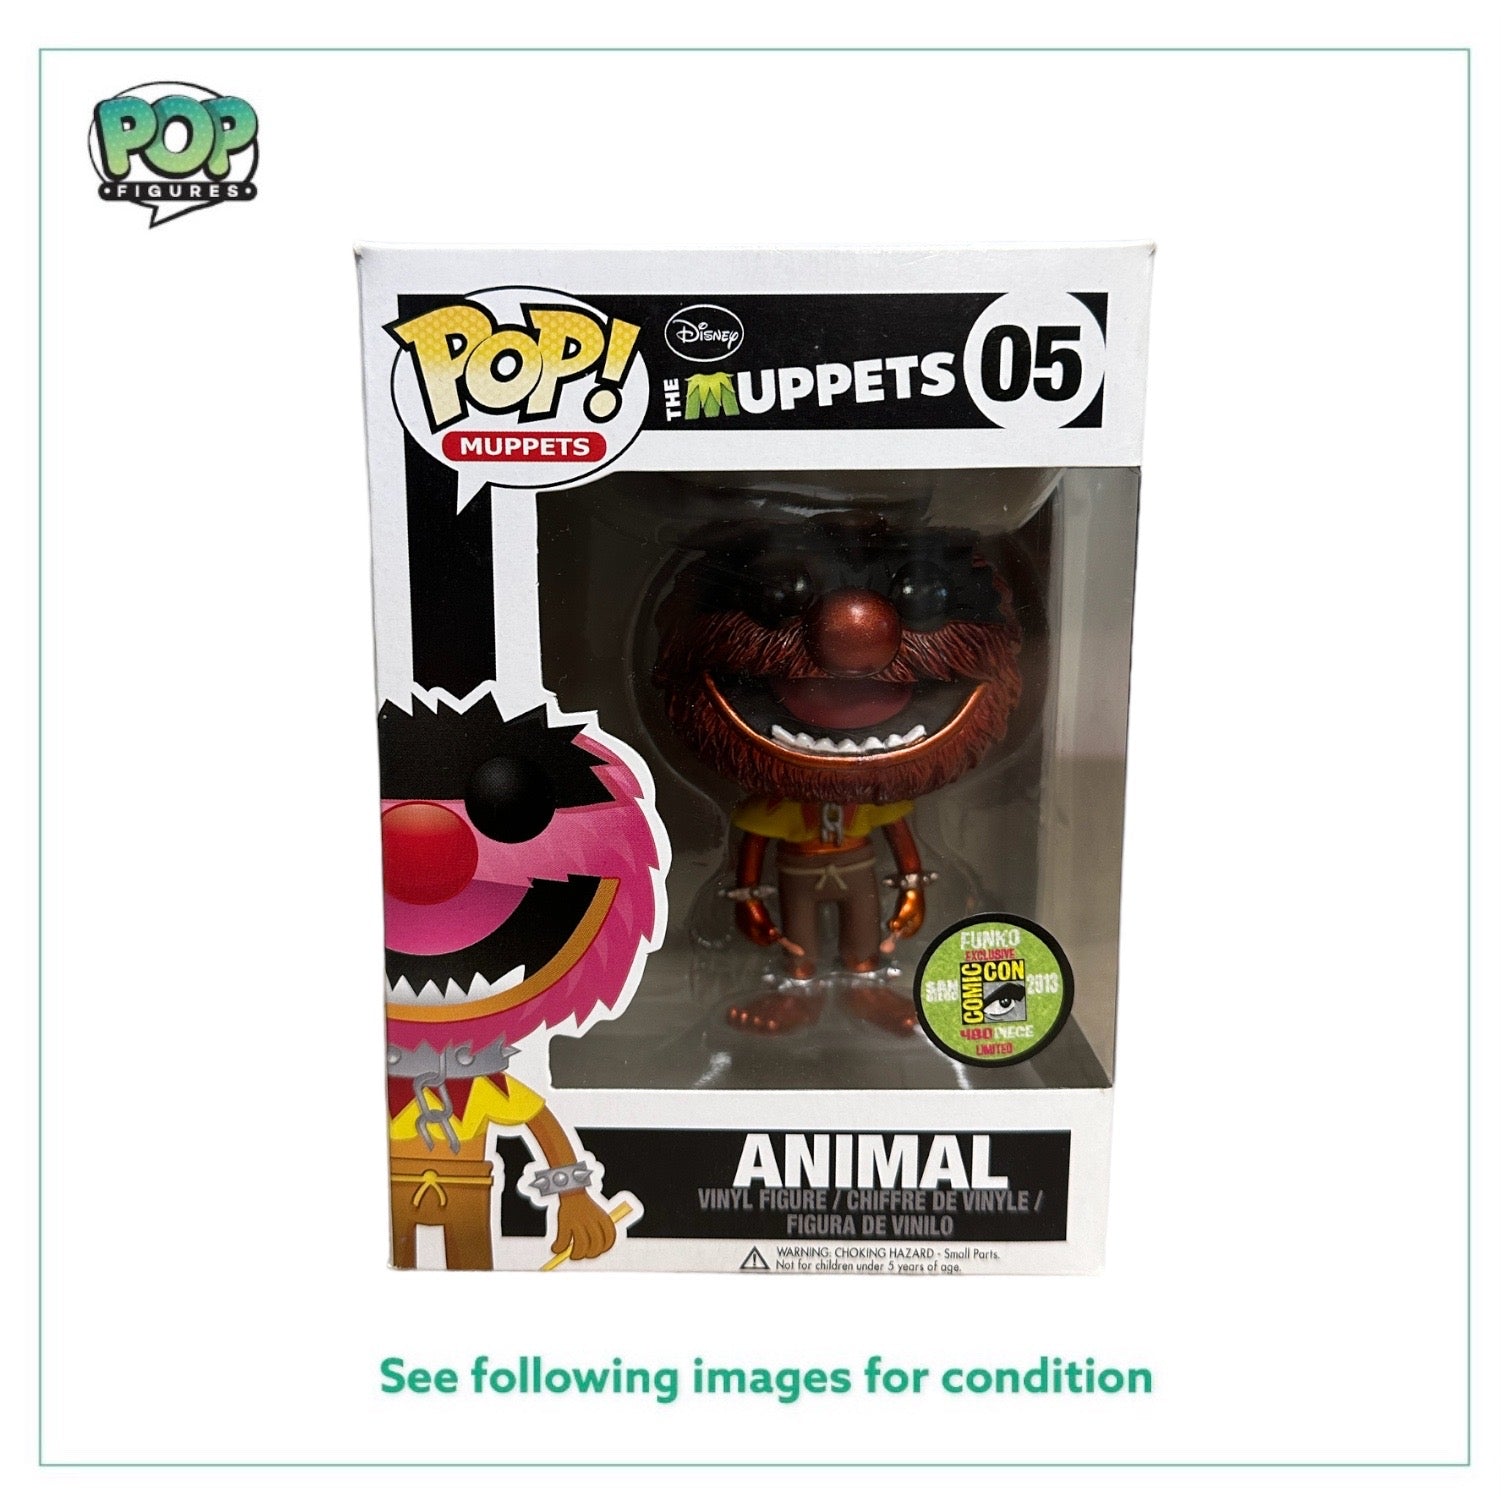 Animal #05 (Metallic) Funko Pop! - The Muppets - SDCC 2013 Exclusive LE480 Pcs - Condition 8/10